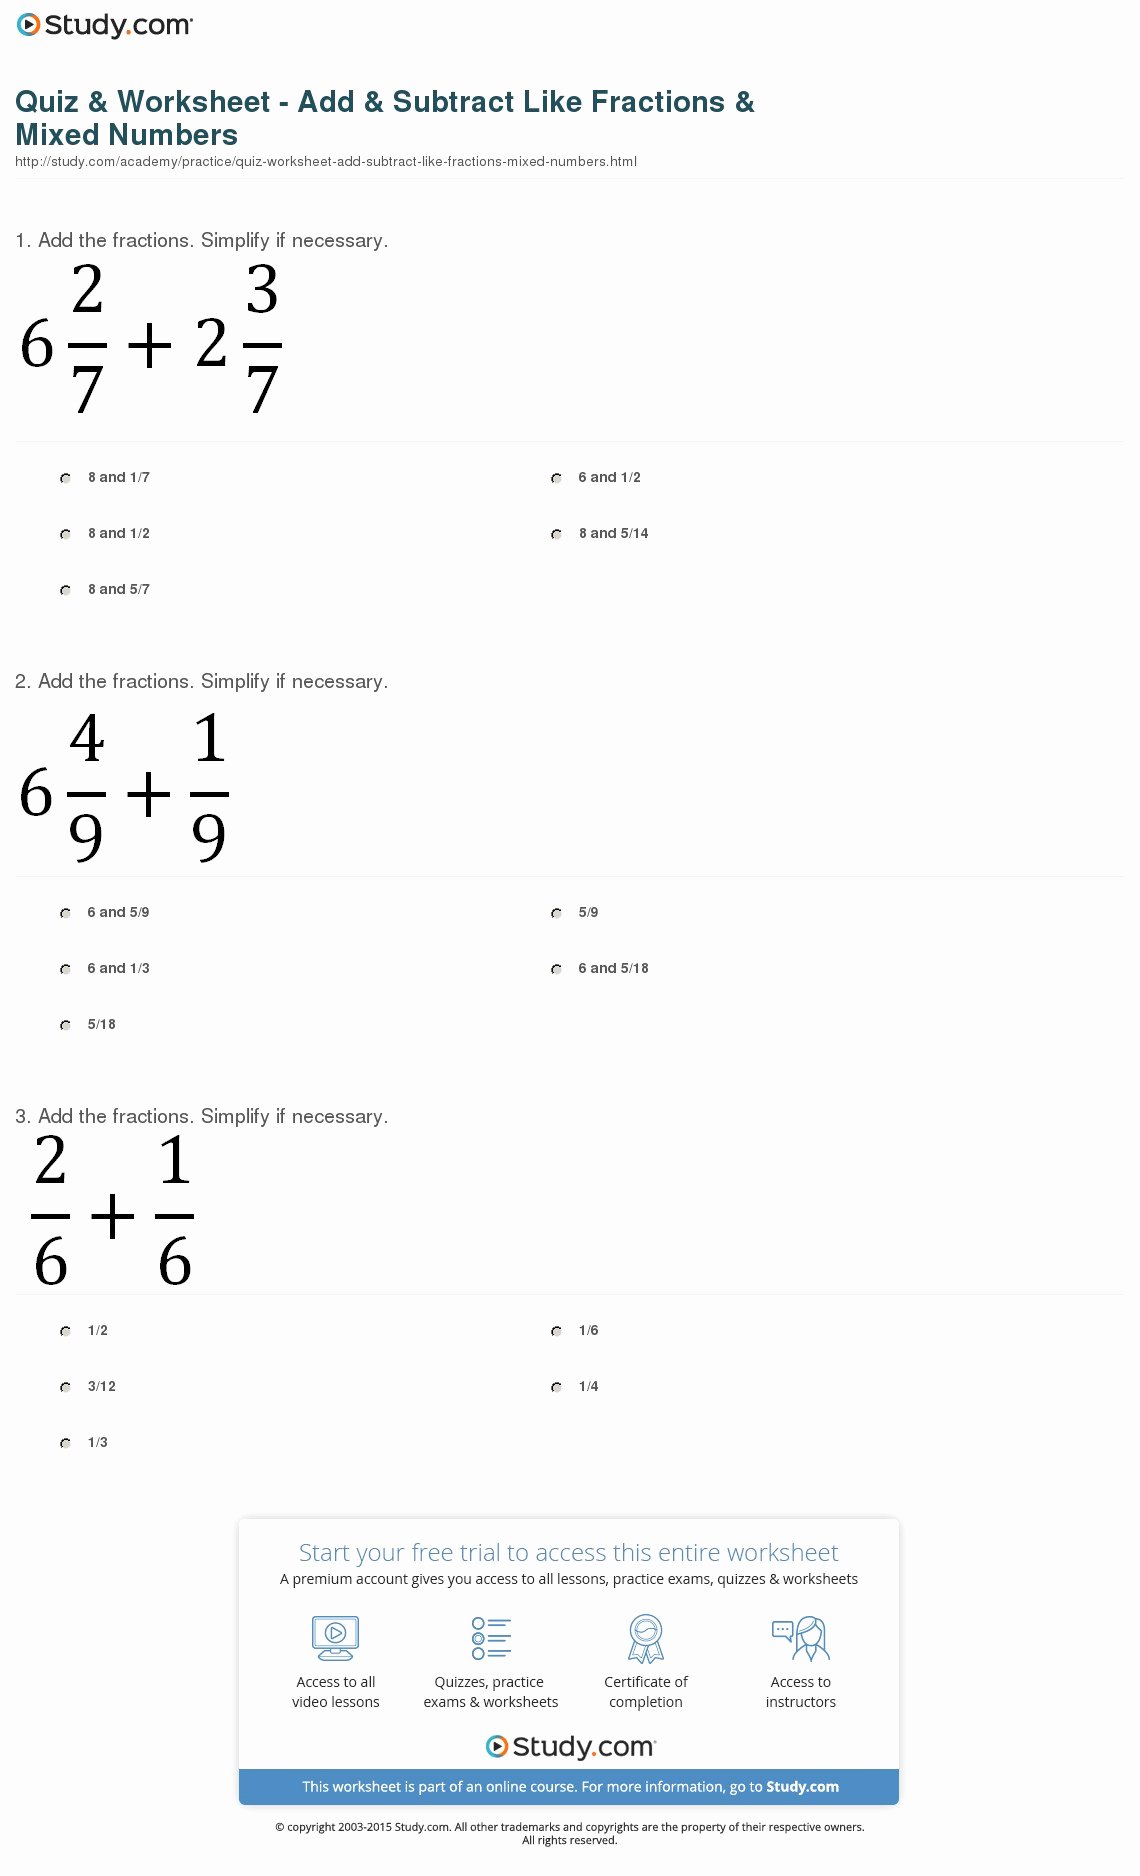 Adding Mixed Numbers Worksheet Unique Quiz &amp; Worksheet Add &amp; Subtract Like Fractions &amp; Mixed